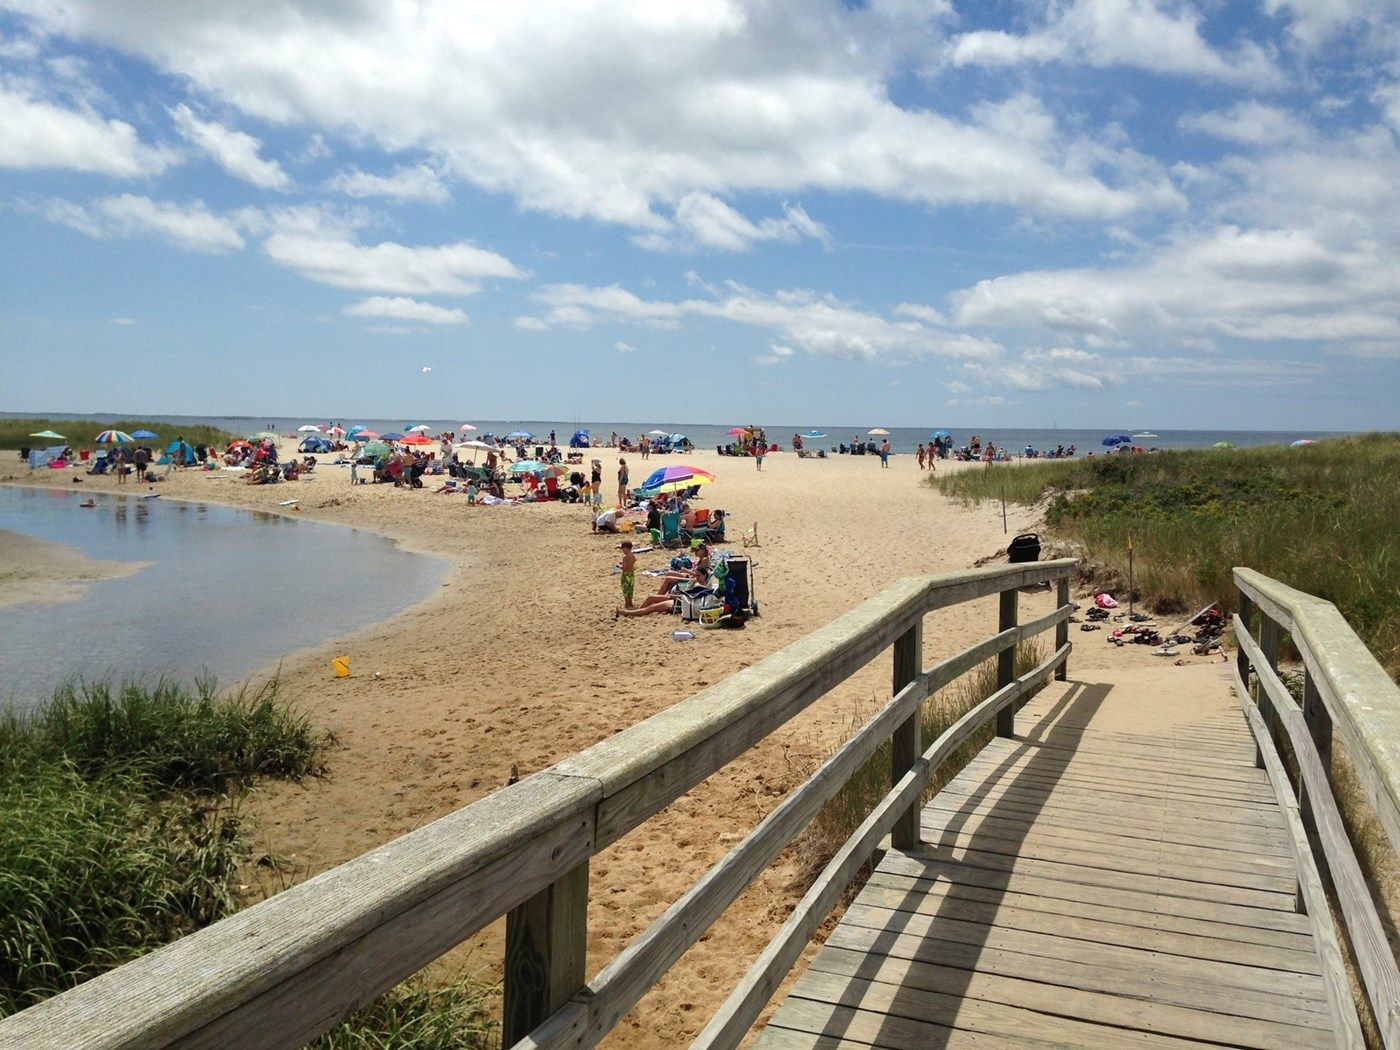 South Chatham offers several beaches, some with boat rentals